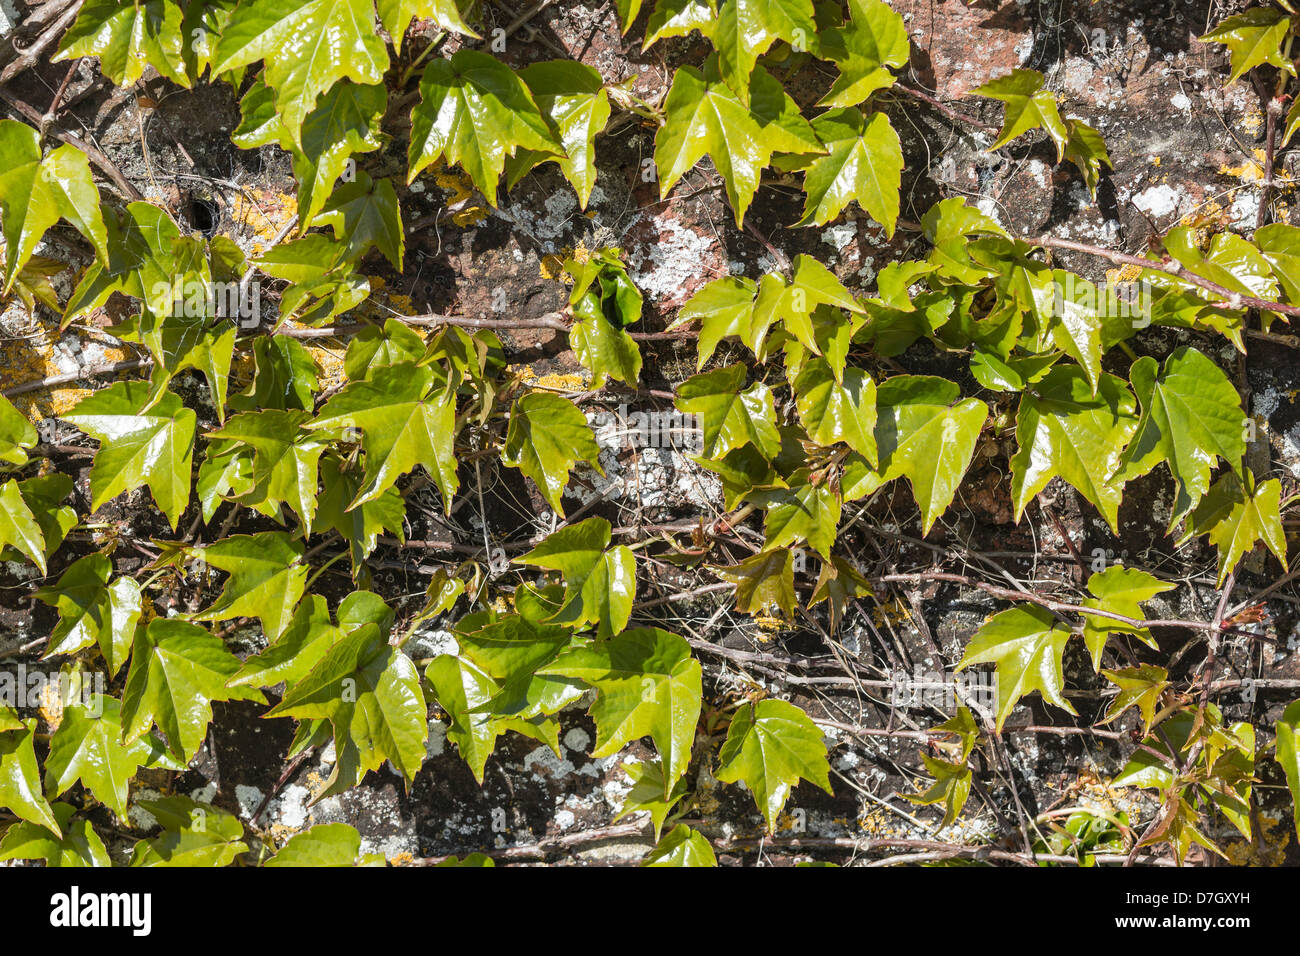 Ivy on wall - new green Ivy growth beginning to cover brick wall Stock Photo